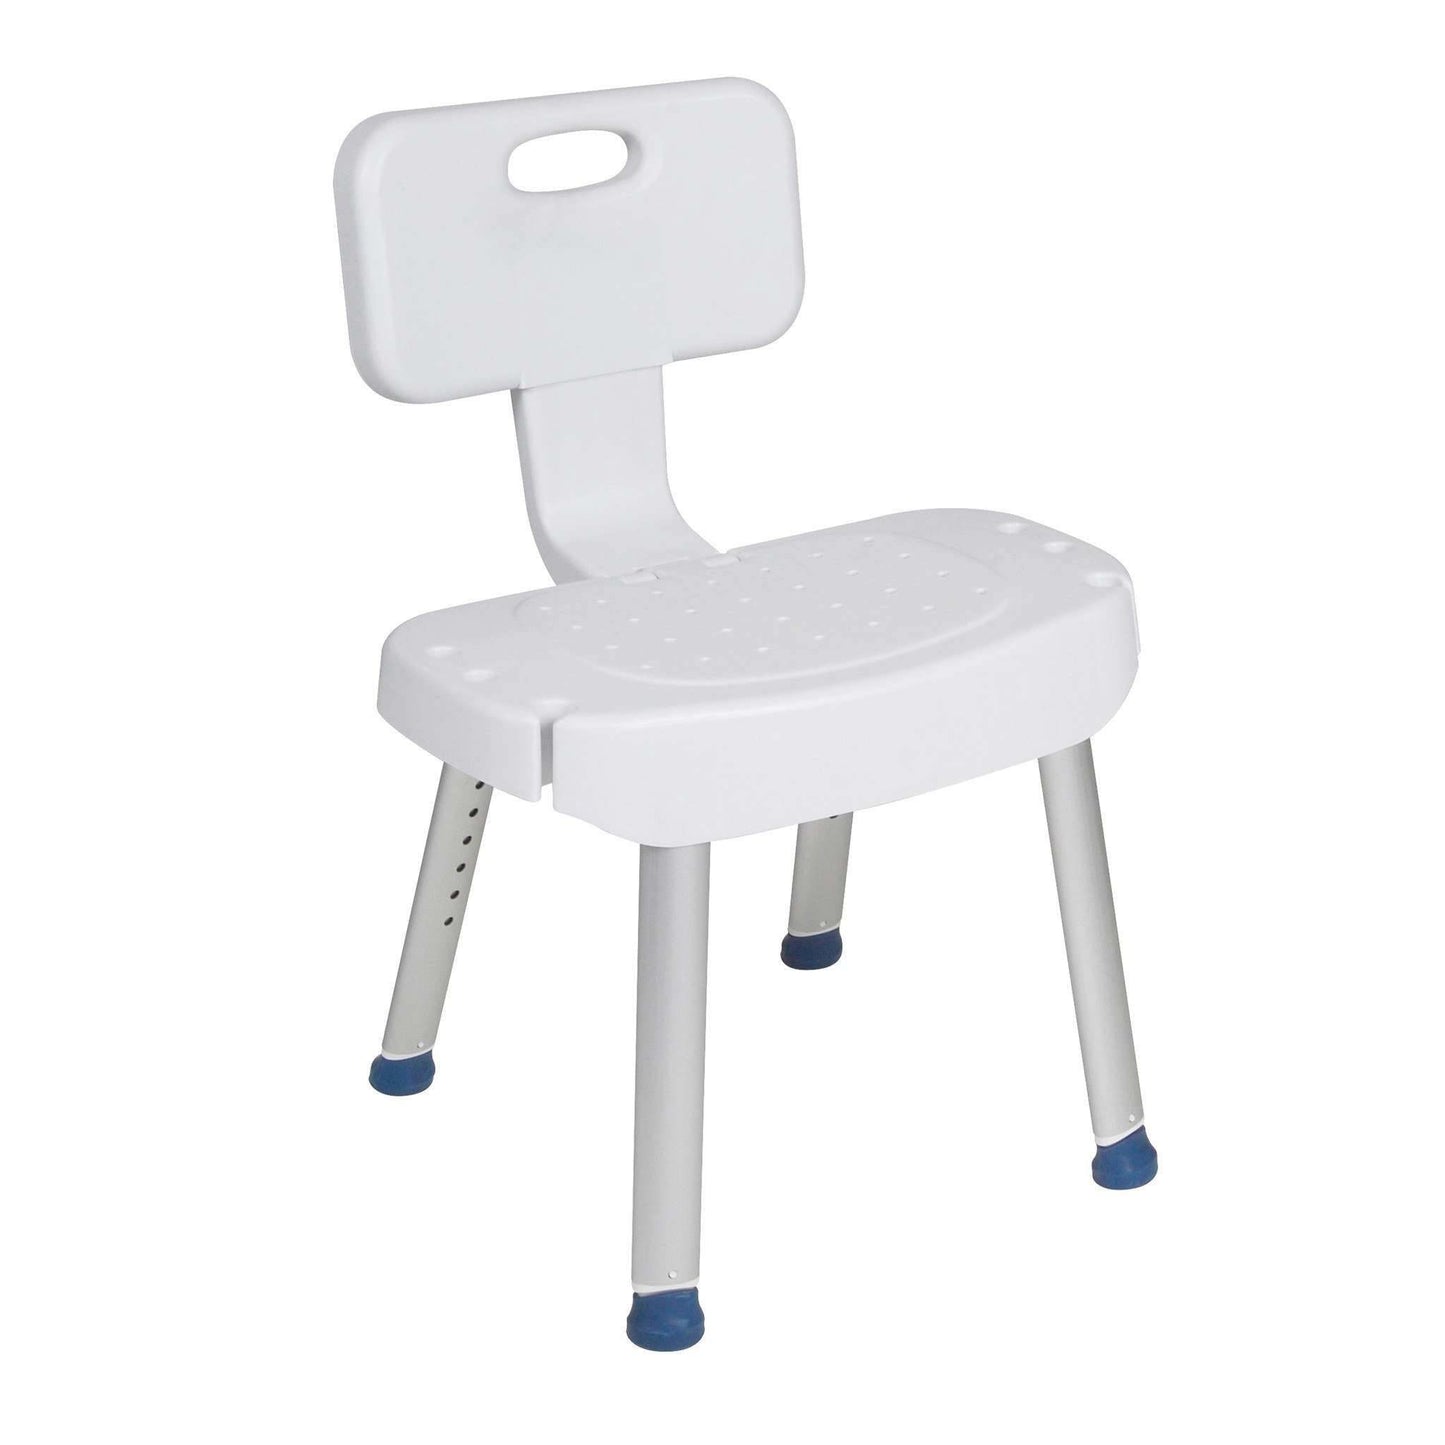 Drive Medical rtl12606 Bathroom Safety Shower Chair with Folding Back